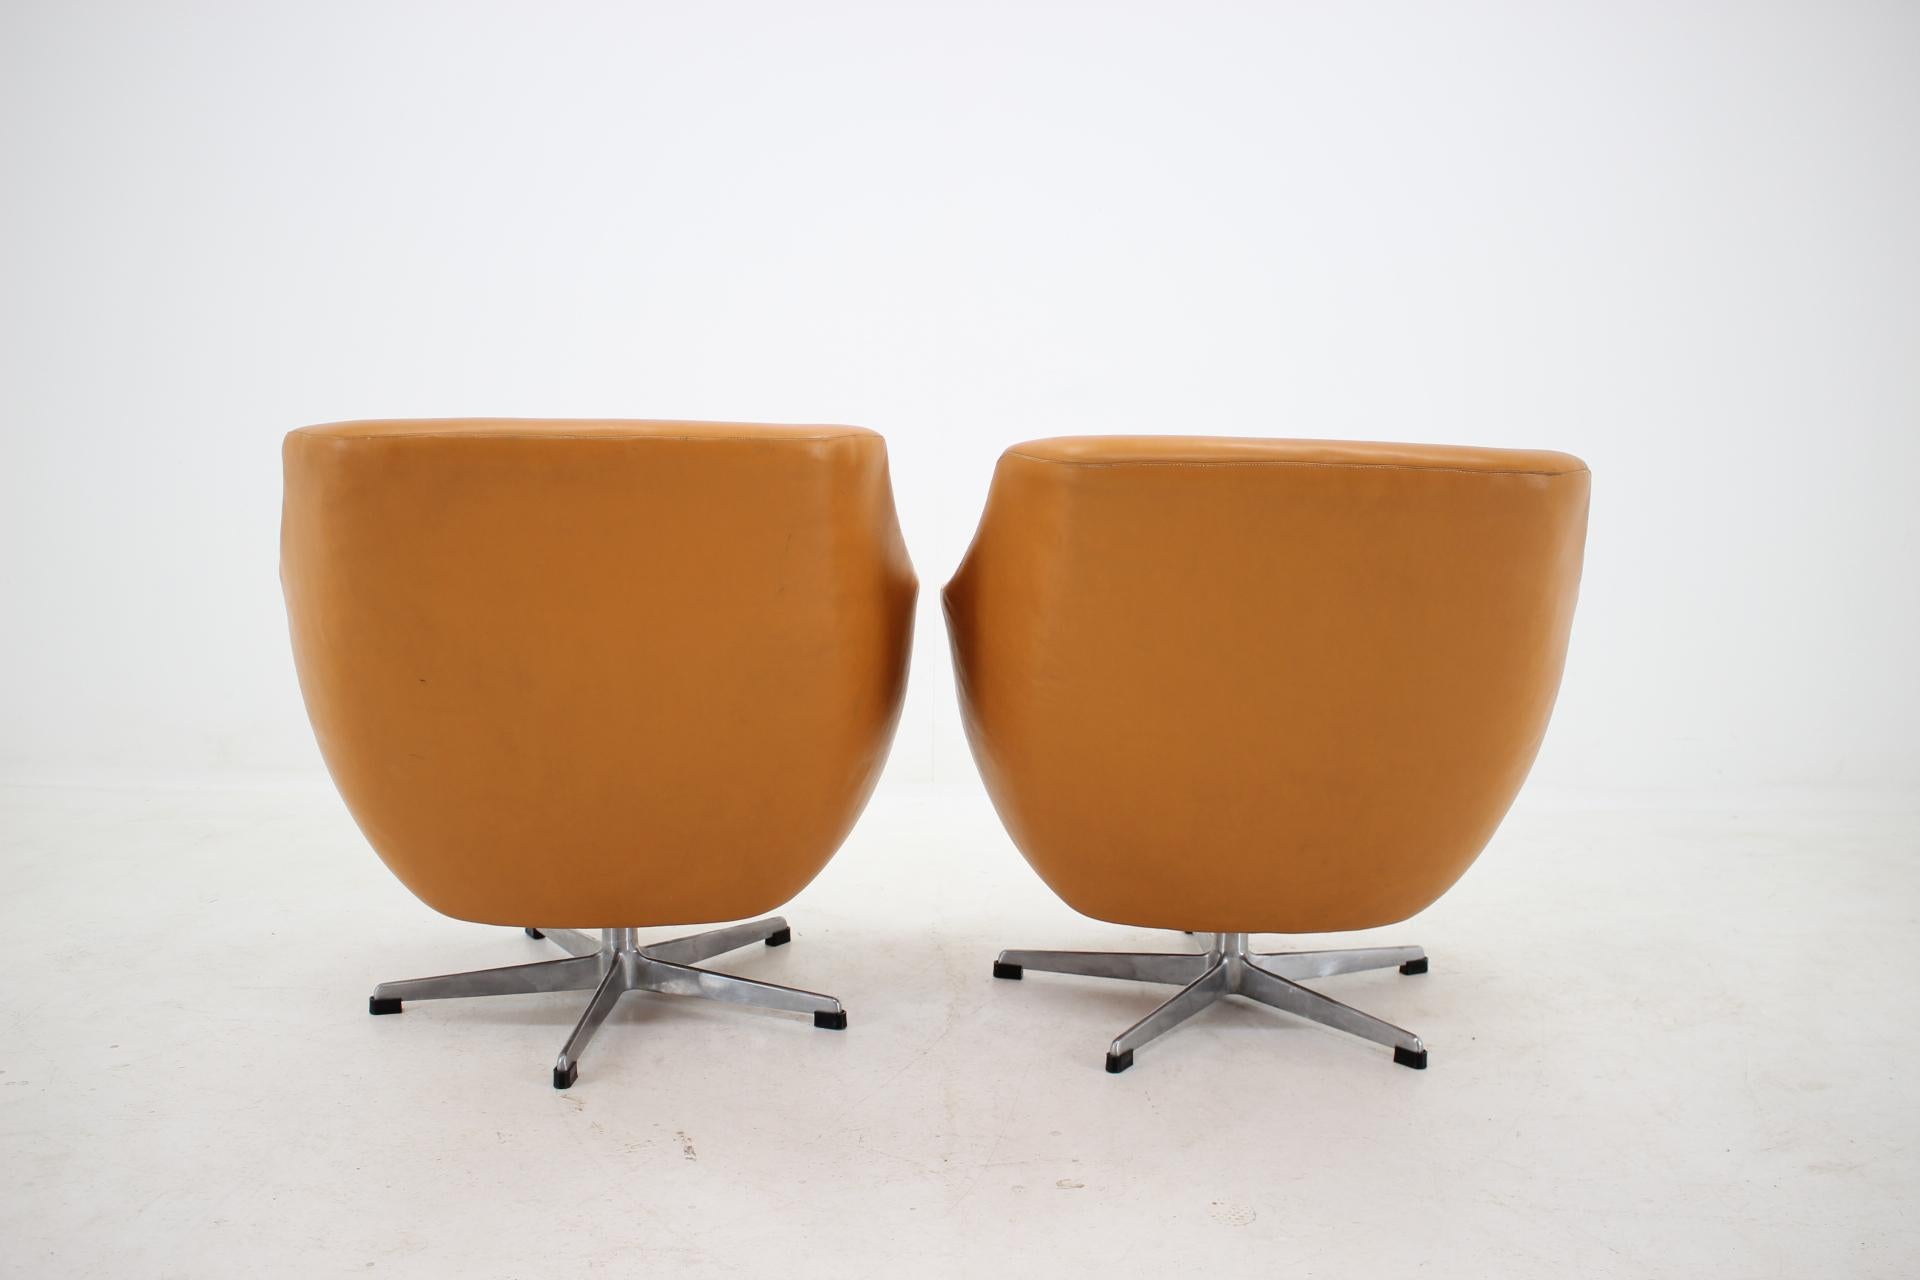 Czech Pair of Leatherette Swivel Chairs, 1970s